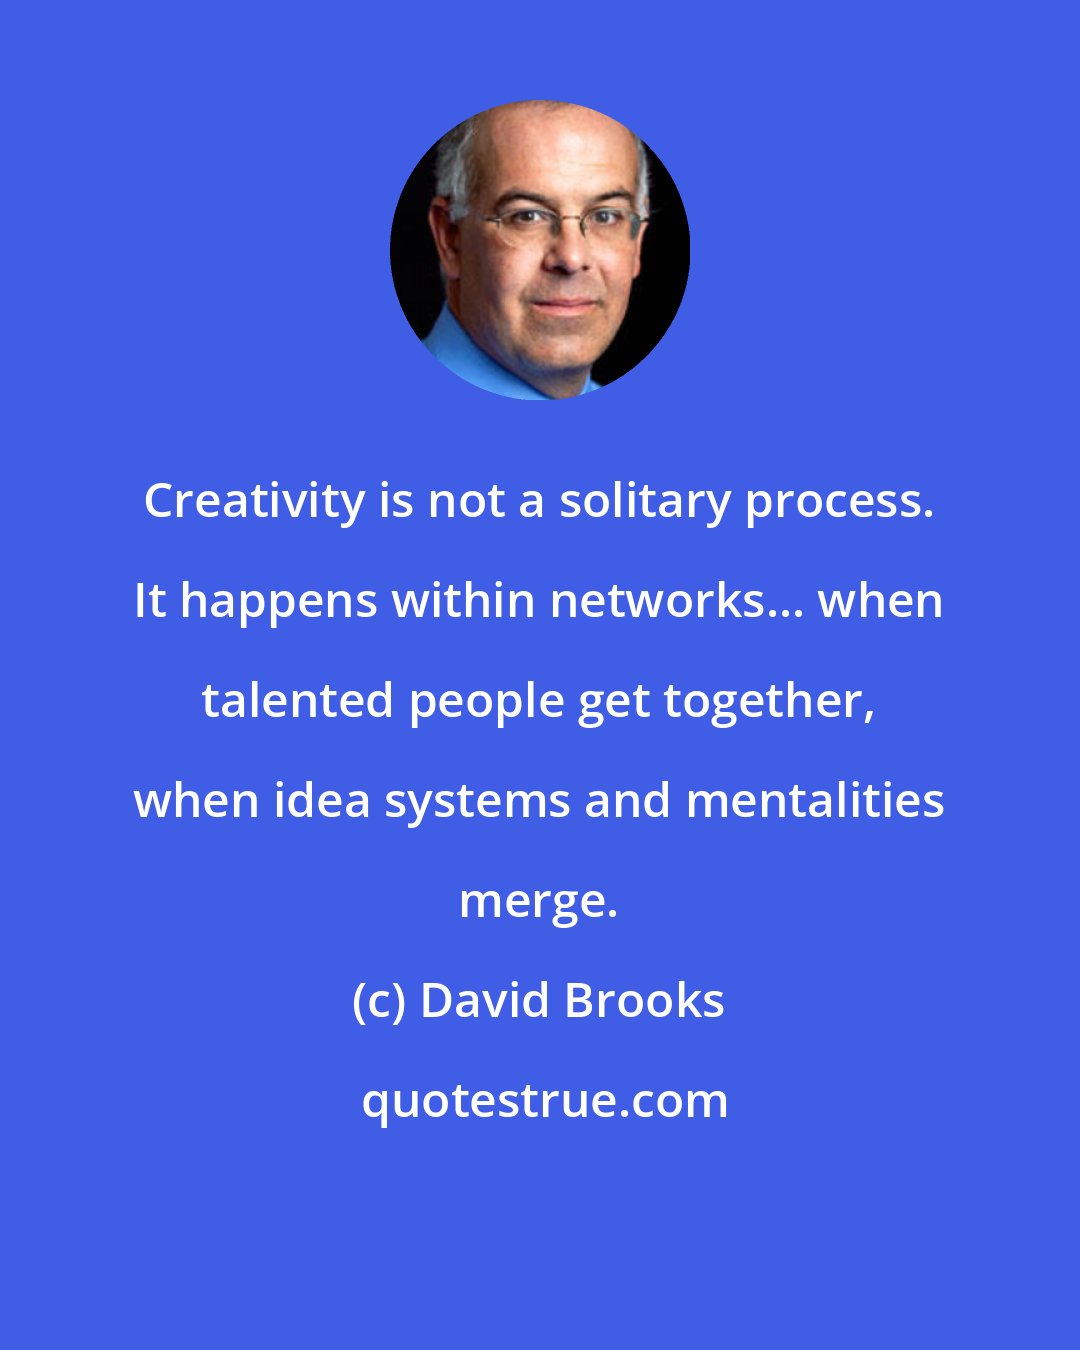 David Brooks: Creativity is not a solitary process. It happens within networks... when talented people get together, when idea systems and mentalities merge.